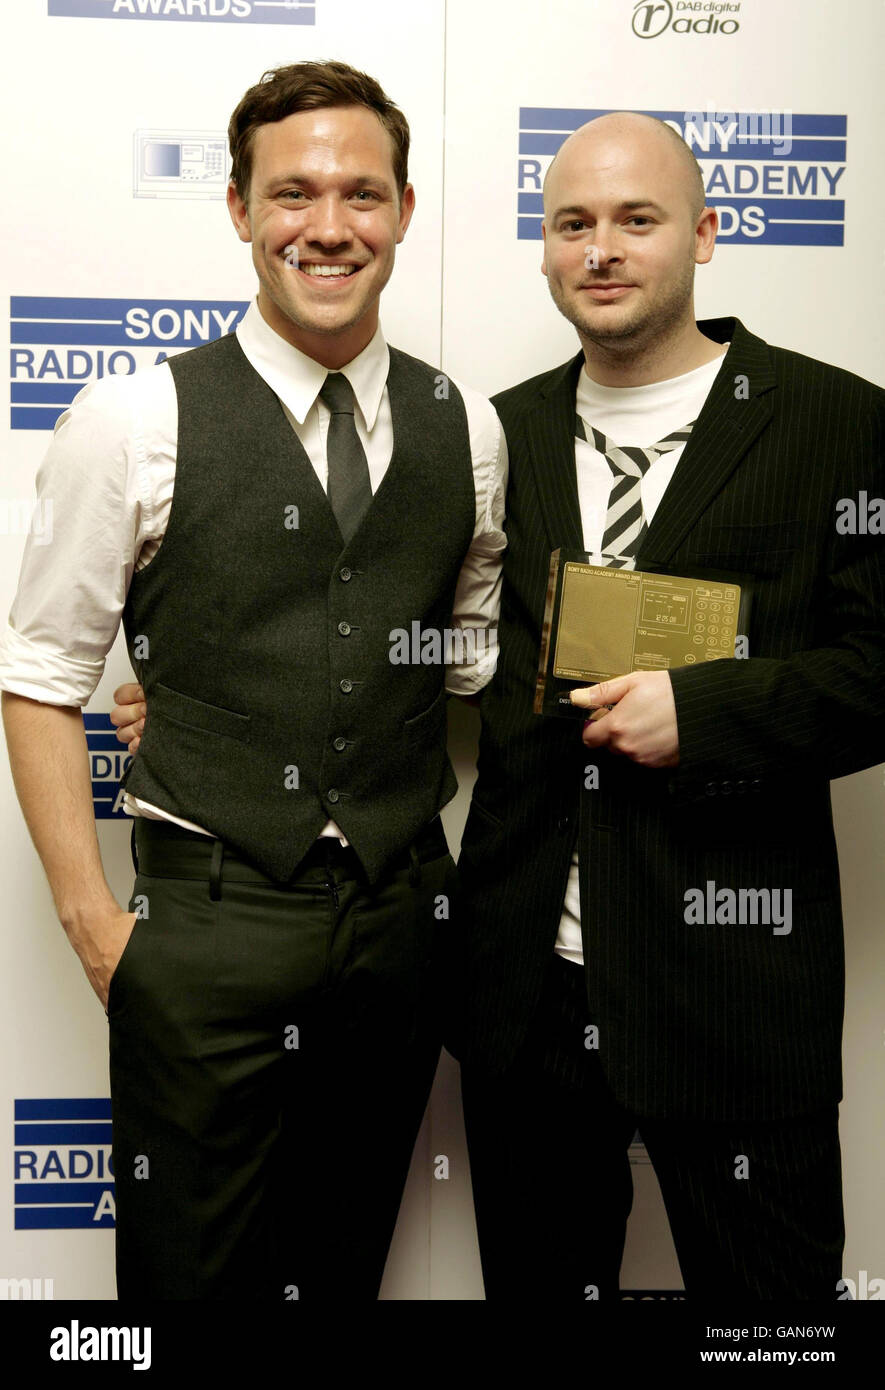 Will Young presents the Music Broadcaster of the Year Award to Andi Durrant of Galaxy Radio during the Sony Radio Academy Awards at the Grosvenor House Hotel in central London. Stock Photo